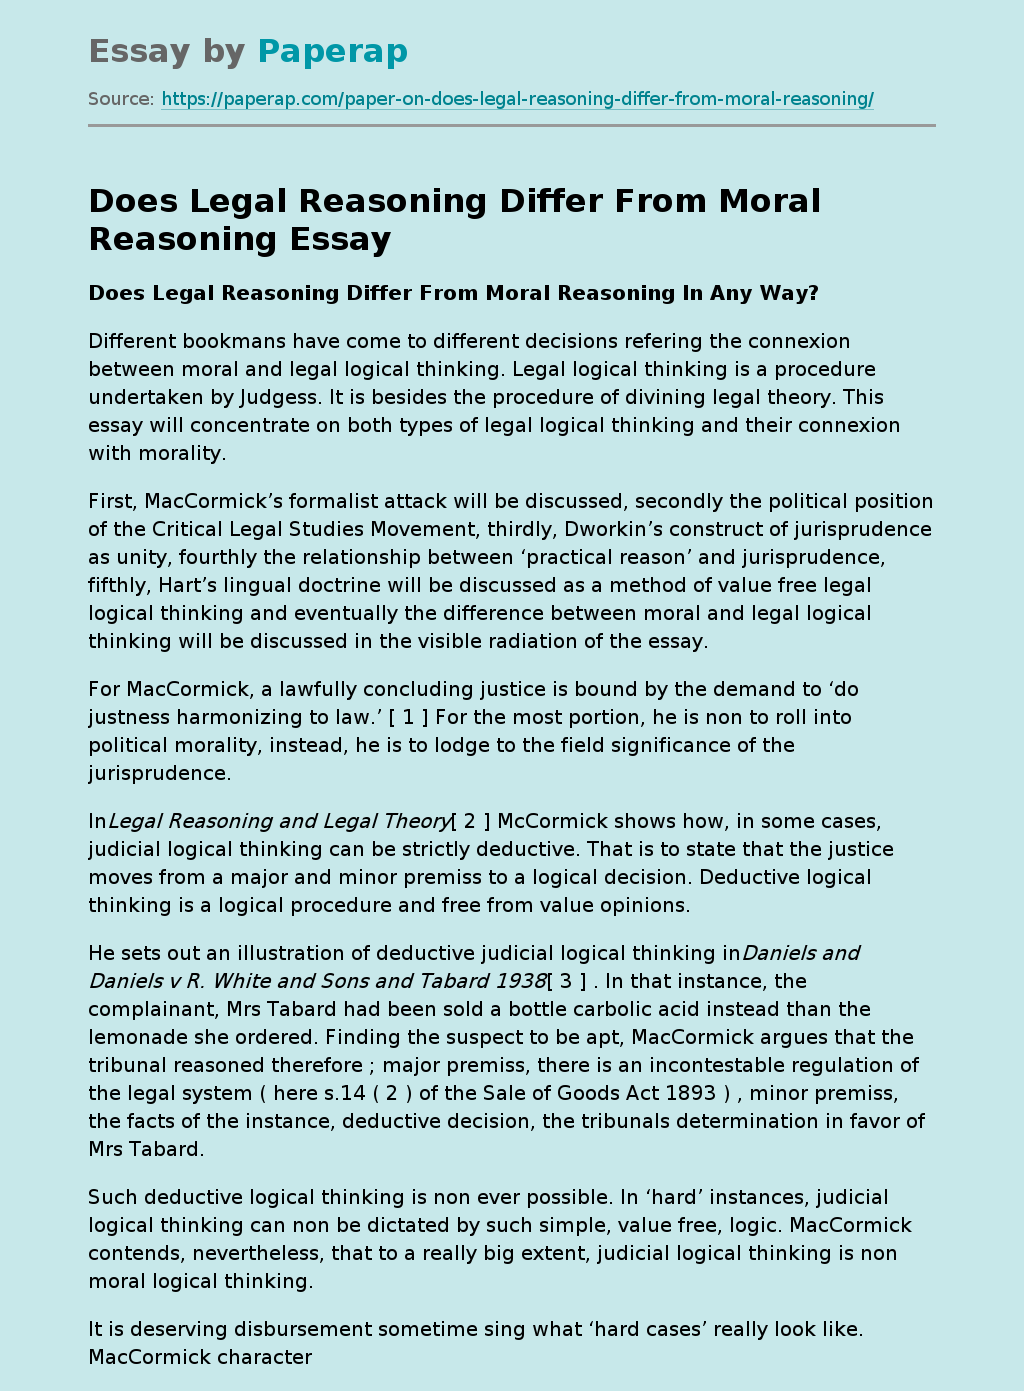 Does Legal Reasoning Differ From Moral Reasoning